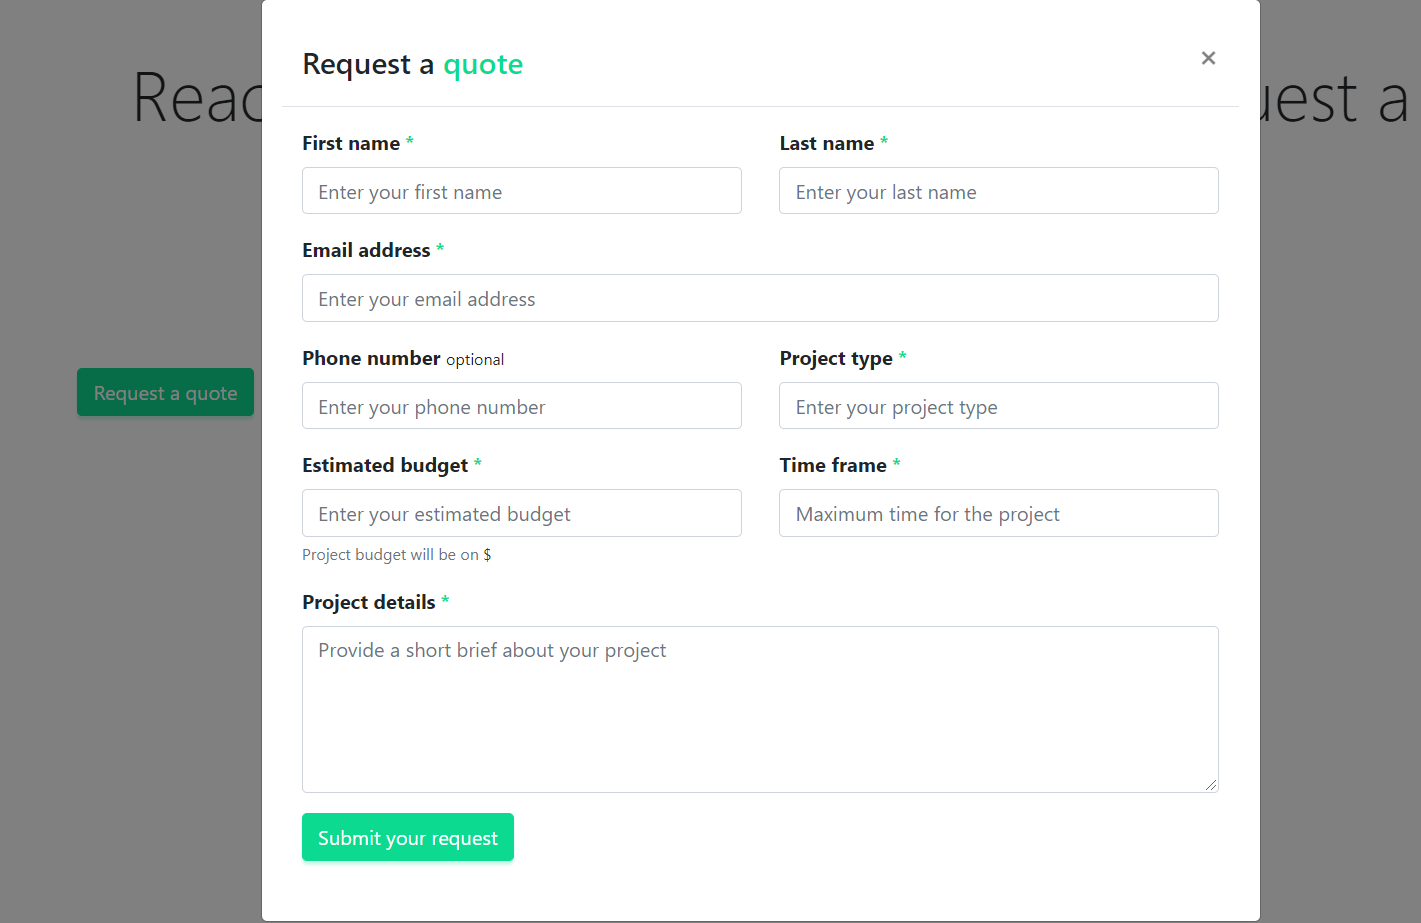 Reactjs Bootstrap 4 Modal Popup Request a quote Form